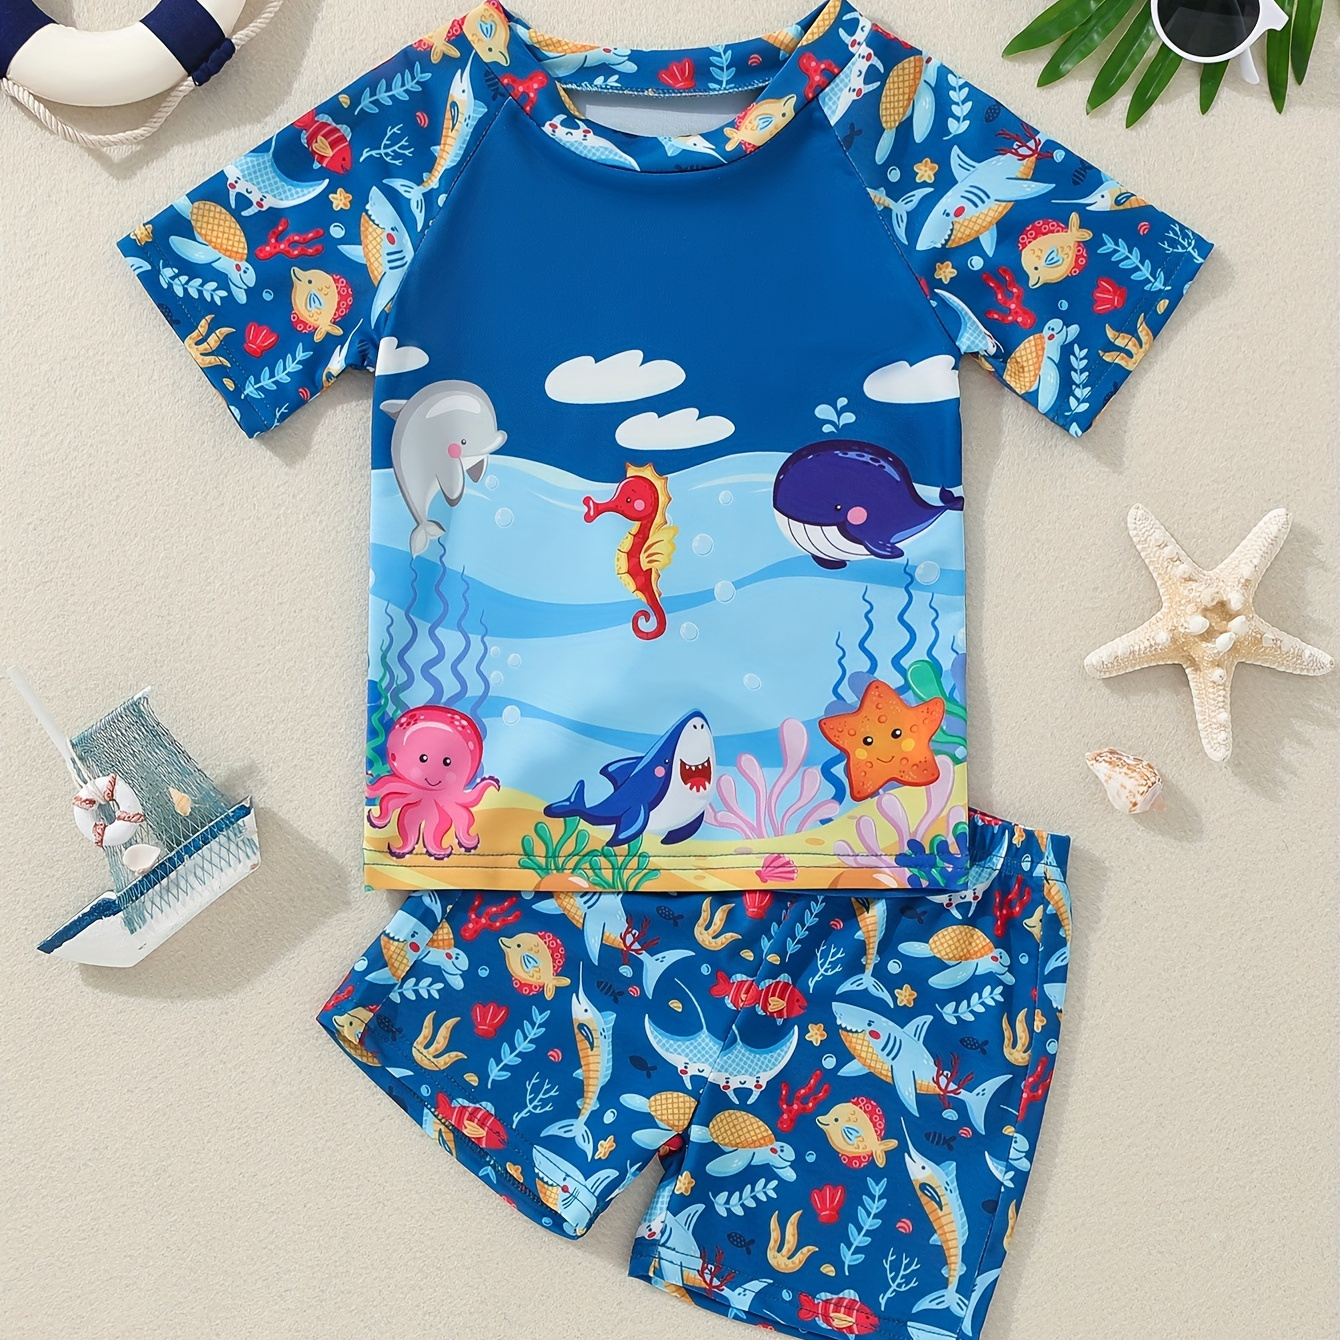 

2pcs Cartoon Underwater Creature Pattern Swimsuit For Boys, T-shirt & Swim Trunks Set, Stretchy Surfing Suit, Boys Swimwear For Summer Beach Vacation